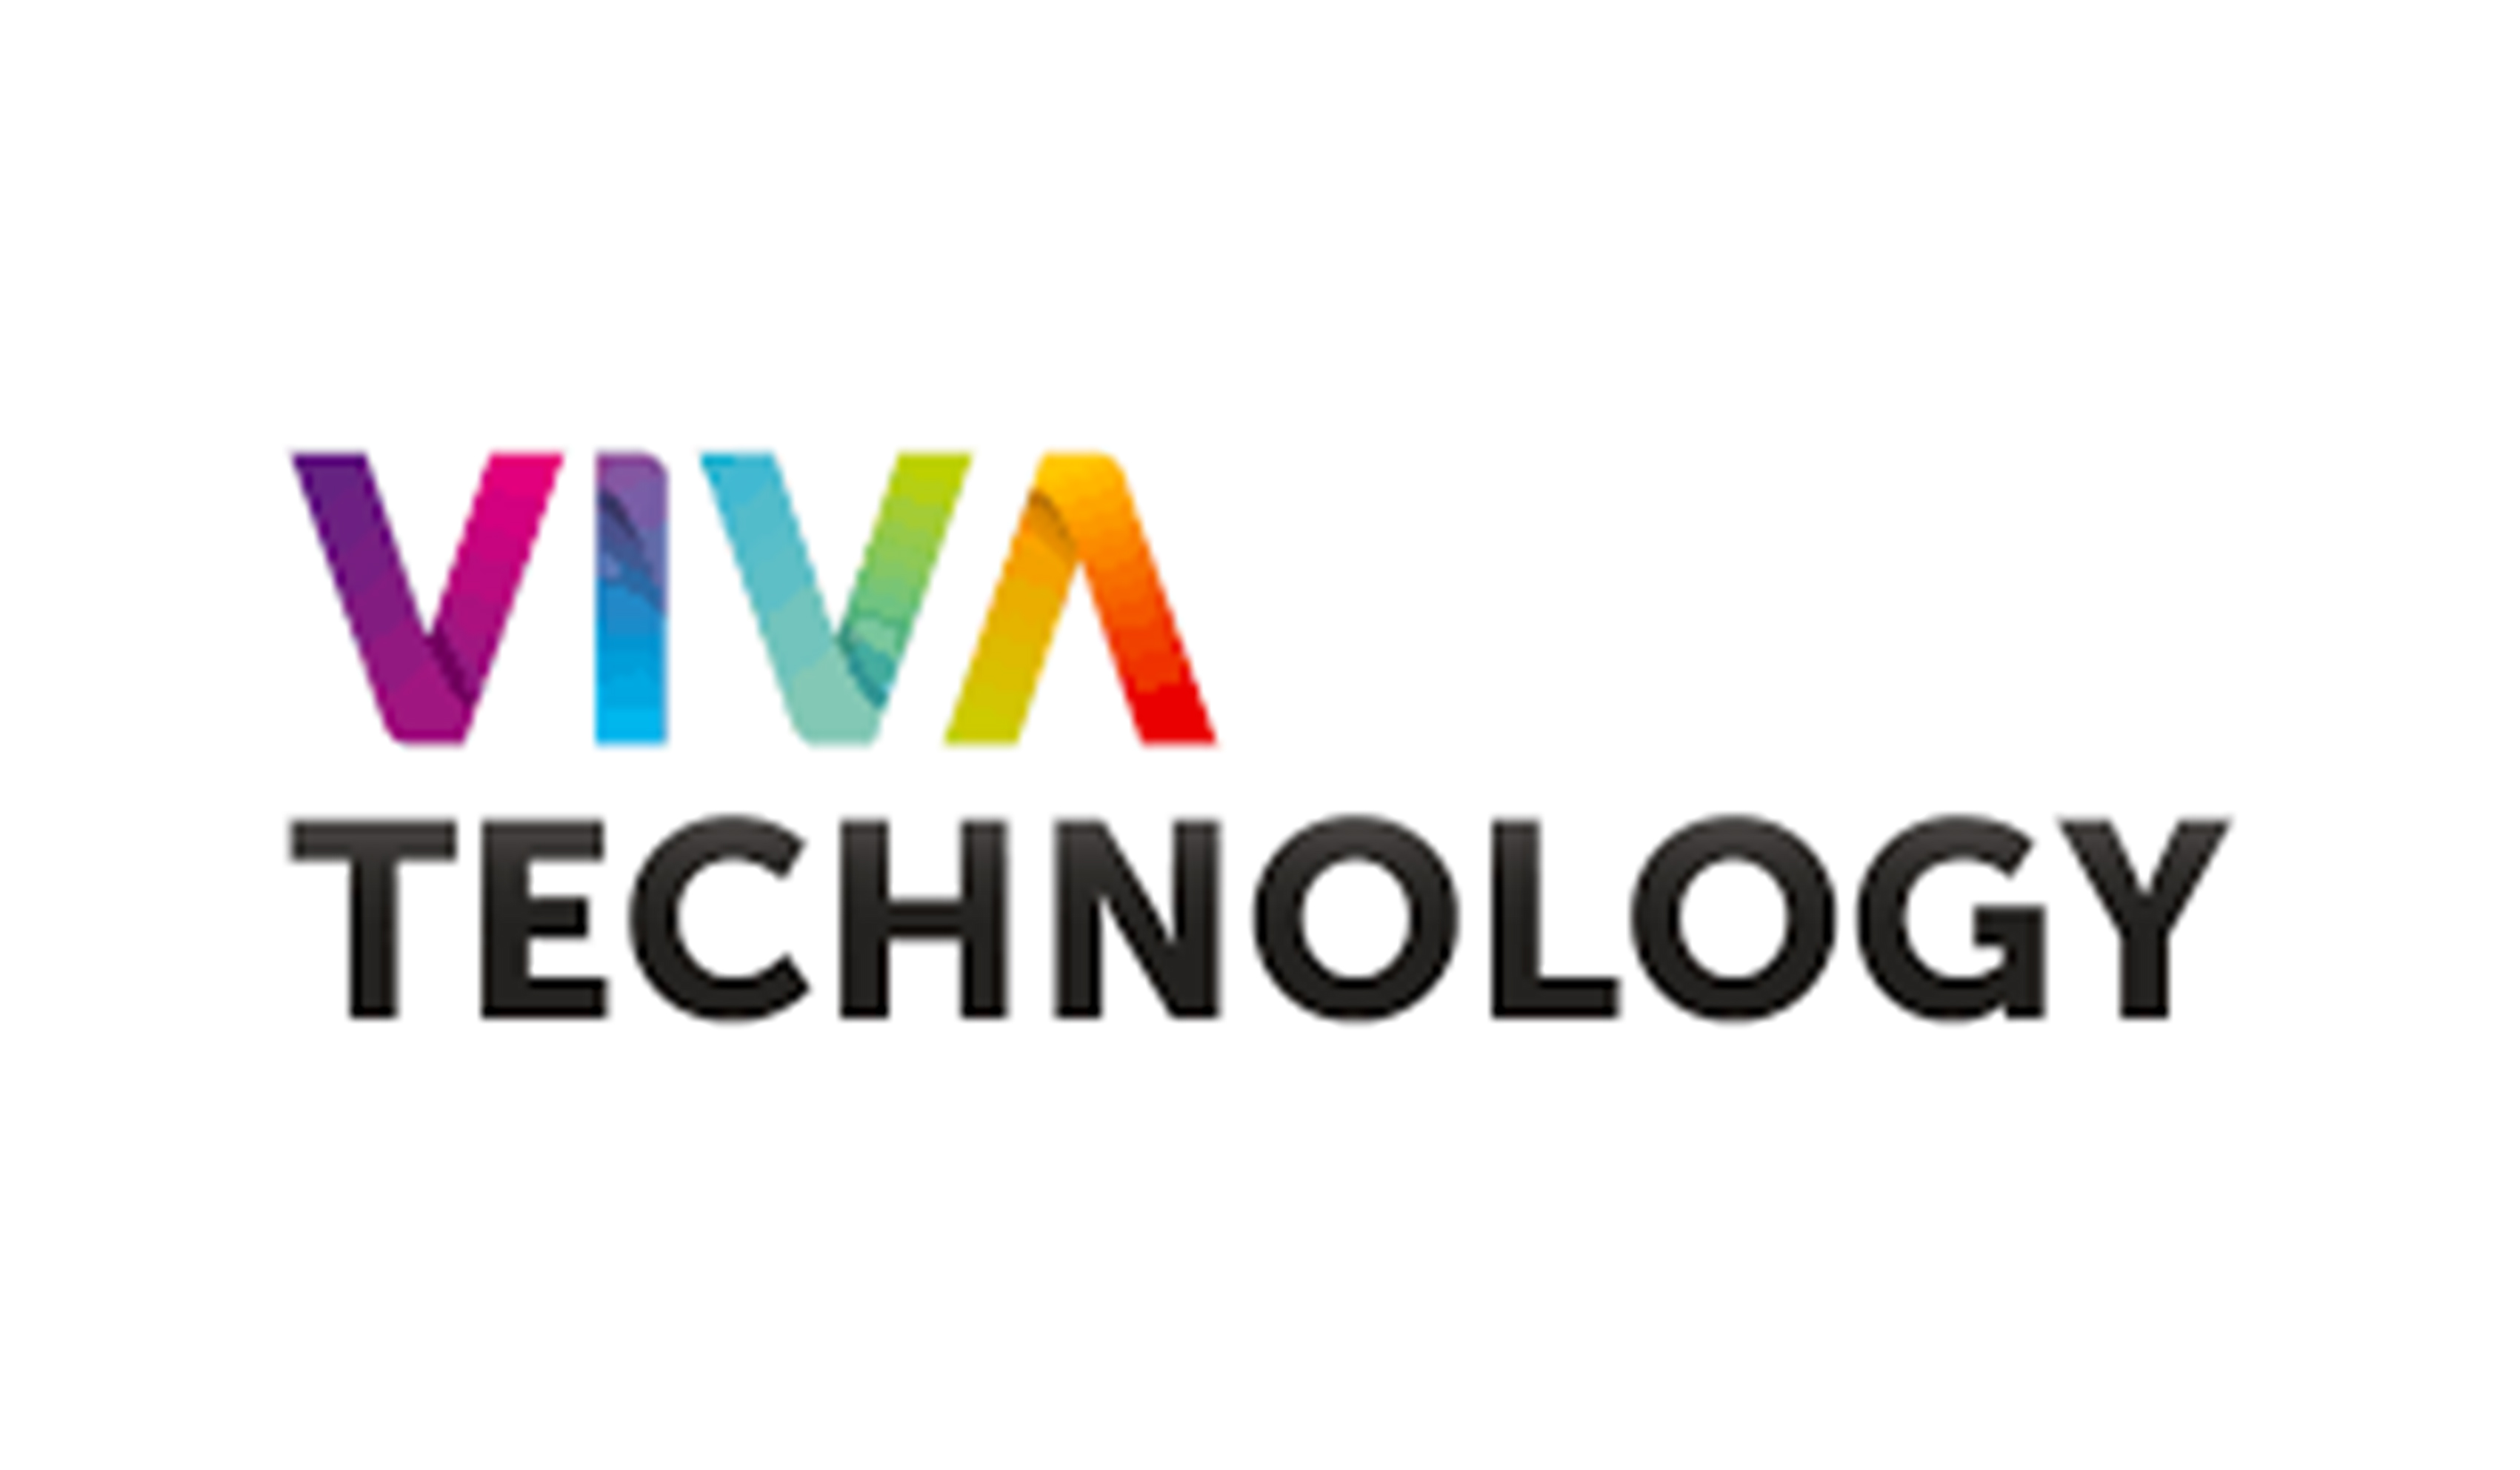 ENGIE at VIVATECH 2020 (Event under report)